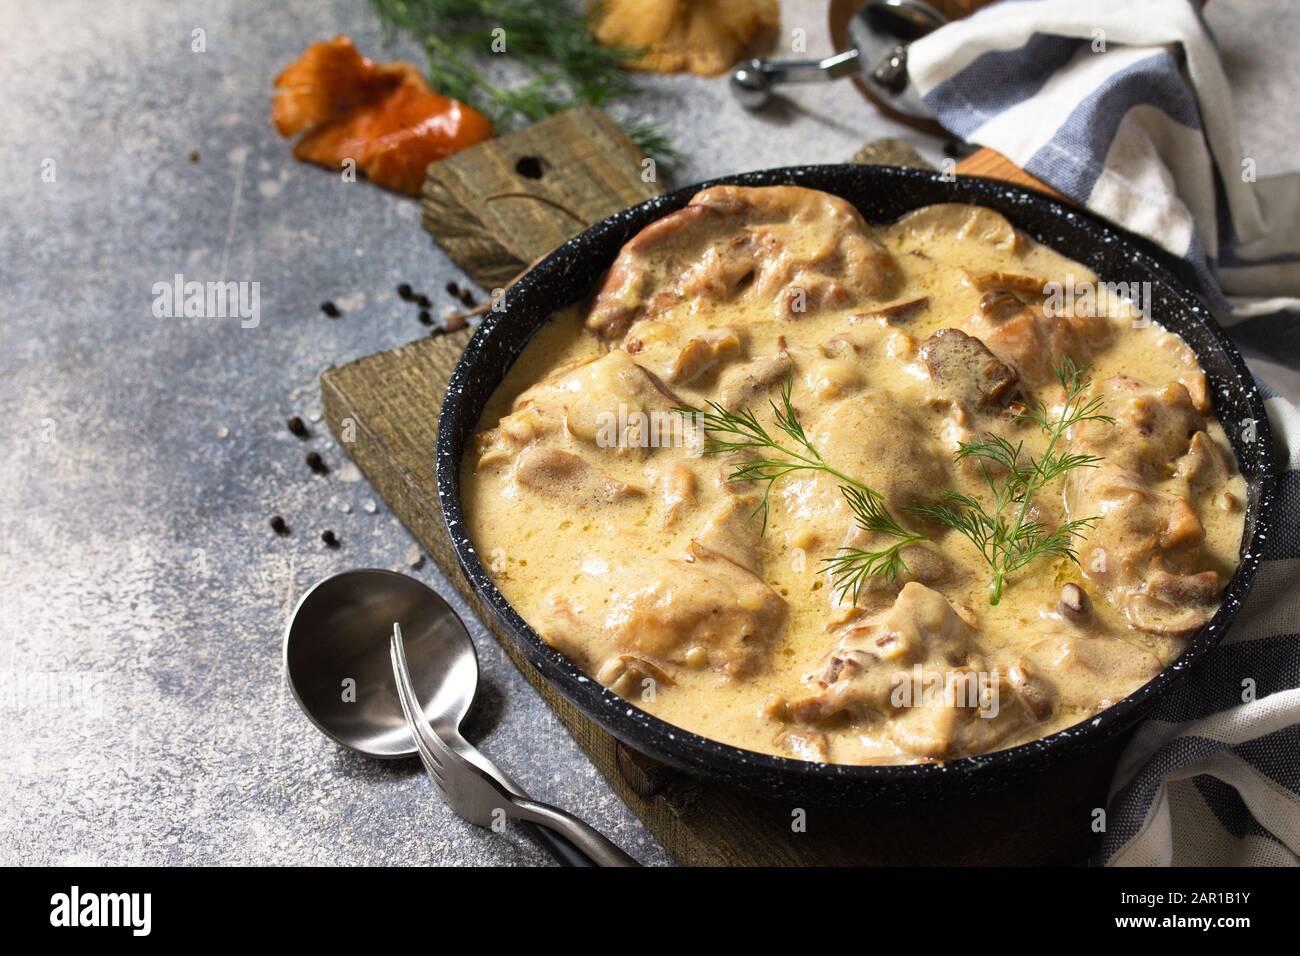 Fricasse - French Cuisine. Chicken stewed in a creamy sauce with mushrooms  in a pan on a light stone background Stock Photo - Alamy